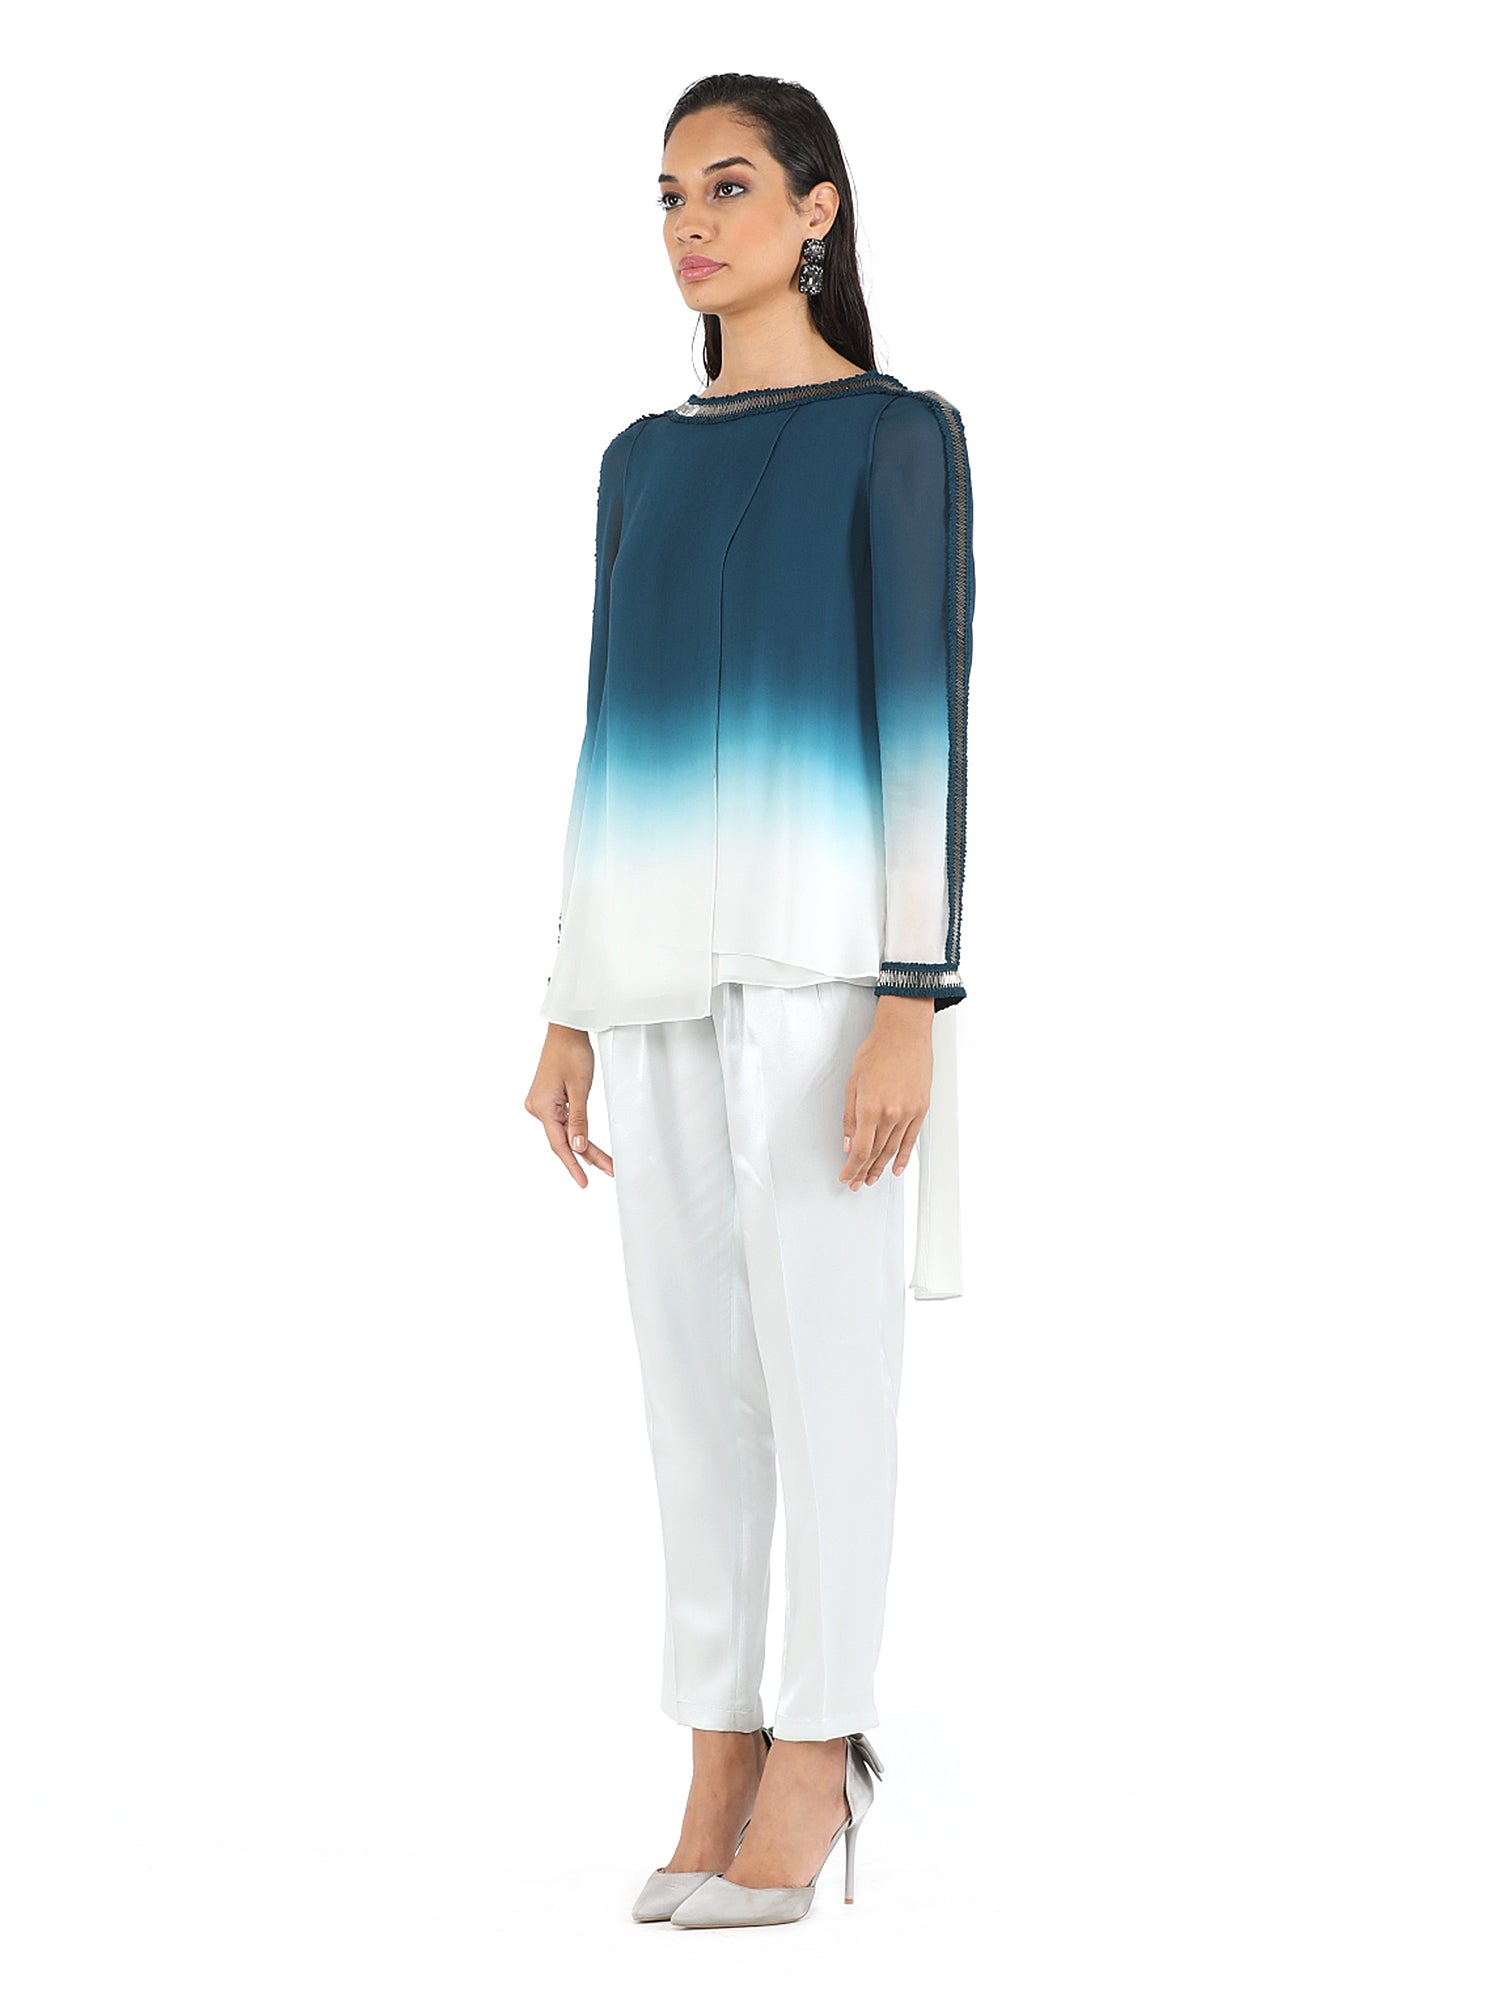 Ombre Hues Round Neck Top